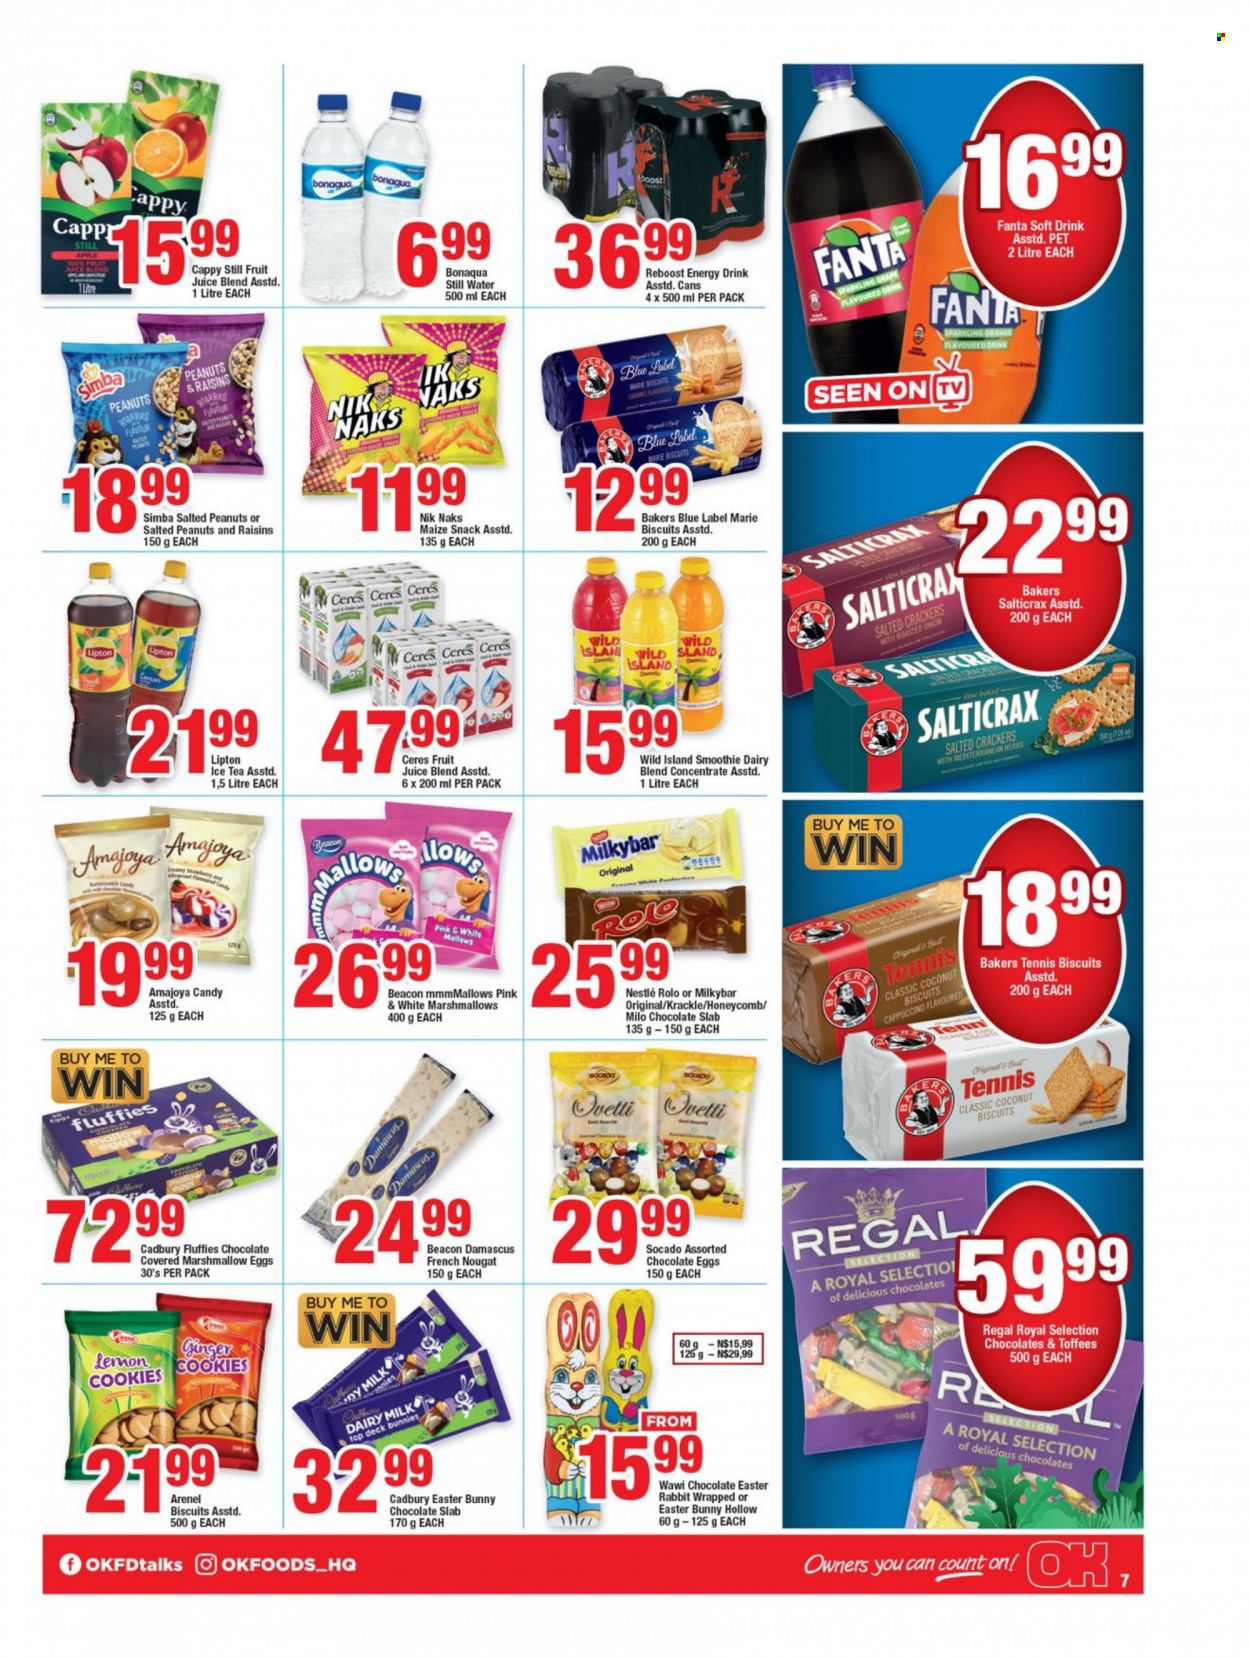 thumbnail - OK catalogue  - 22/03/2023 - 10/04/2023 - Sales products - ginger, onion, oranges, Annie's, Milo, dairy blend, cookies, marshmallows, Nestlé, rabbit, snack, Toffees, nougat, crackers, biscuit, Cadbury, milky bar, Bakers Salticrax, Dairy Milk, chocolate egg, easter bunny, maize snack, Simba, Nik Naks, caramel, peanuts, Fanta, energy drink, Lipton, fruit juice, juice, ice tea, soft drink, Cerés, smoothie, Bonaqua, water, Boost, tea, cappuccino. Page 6.